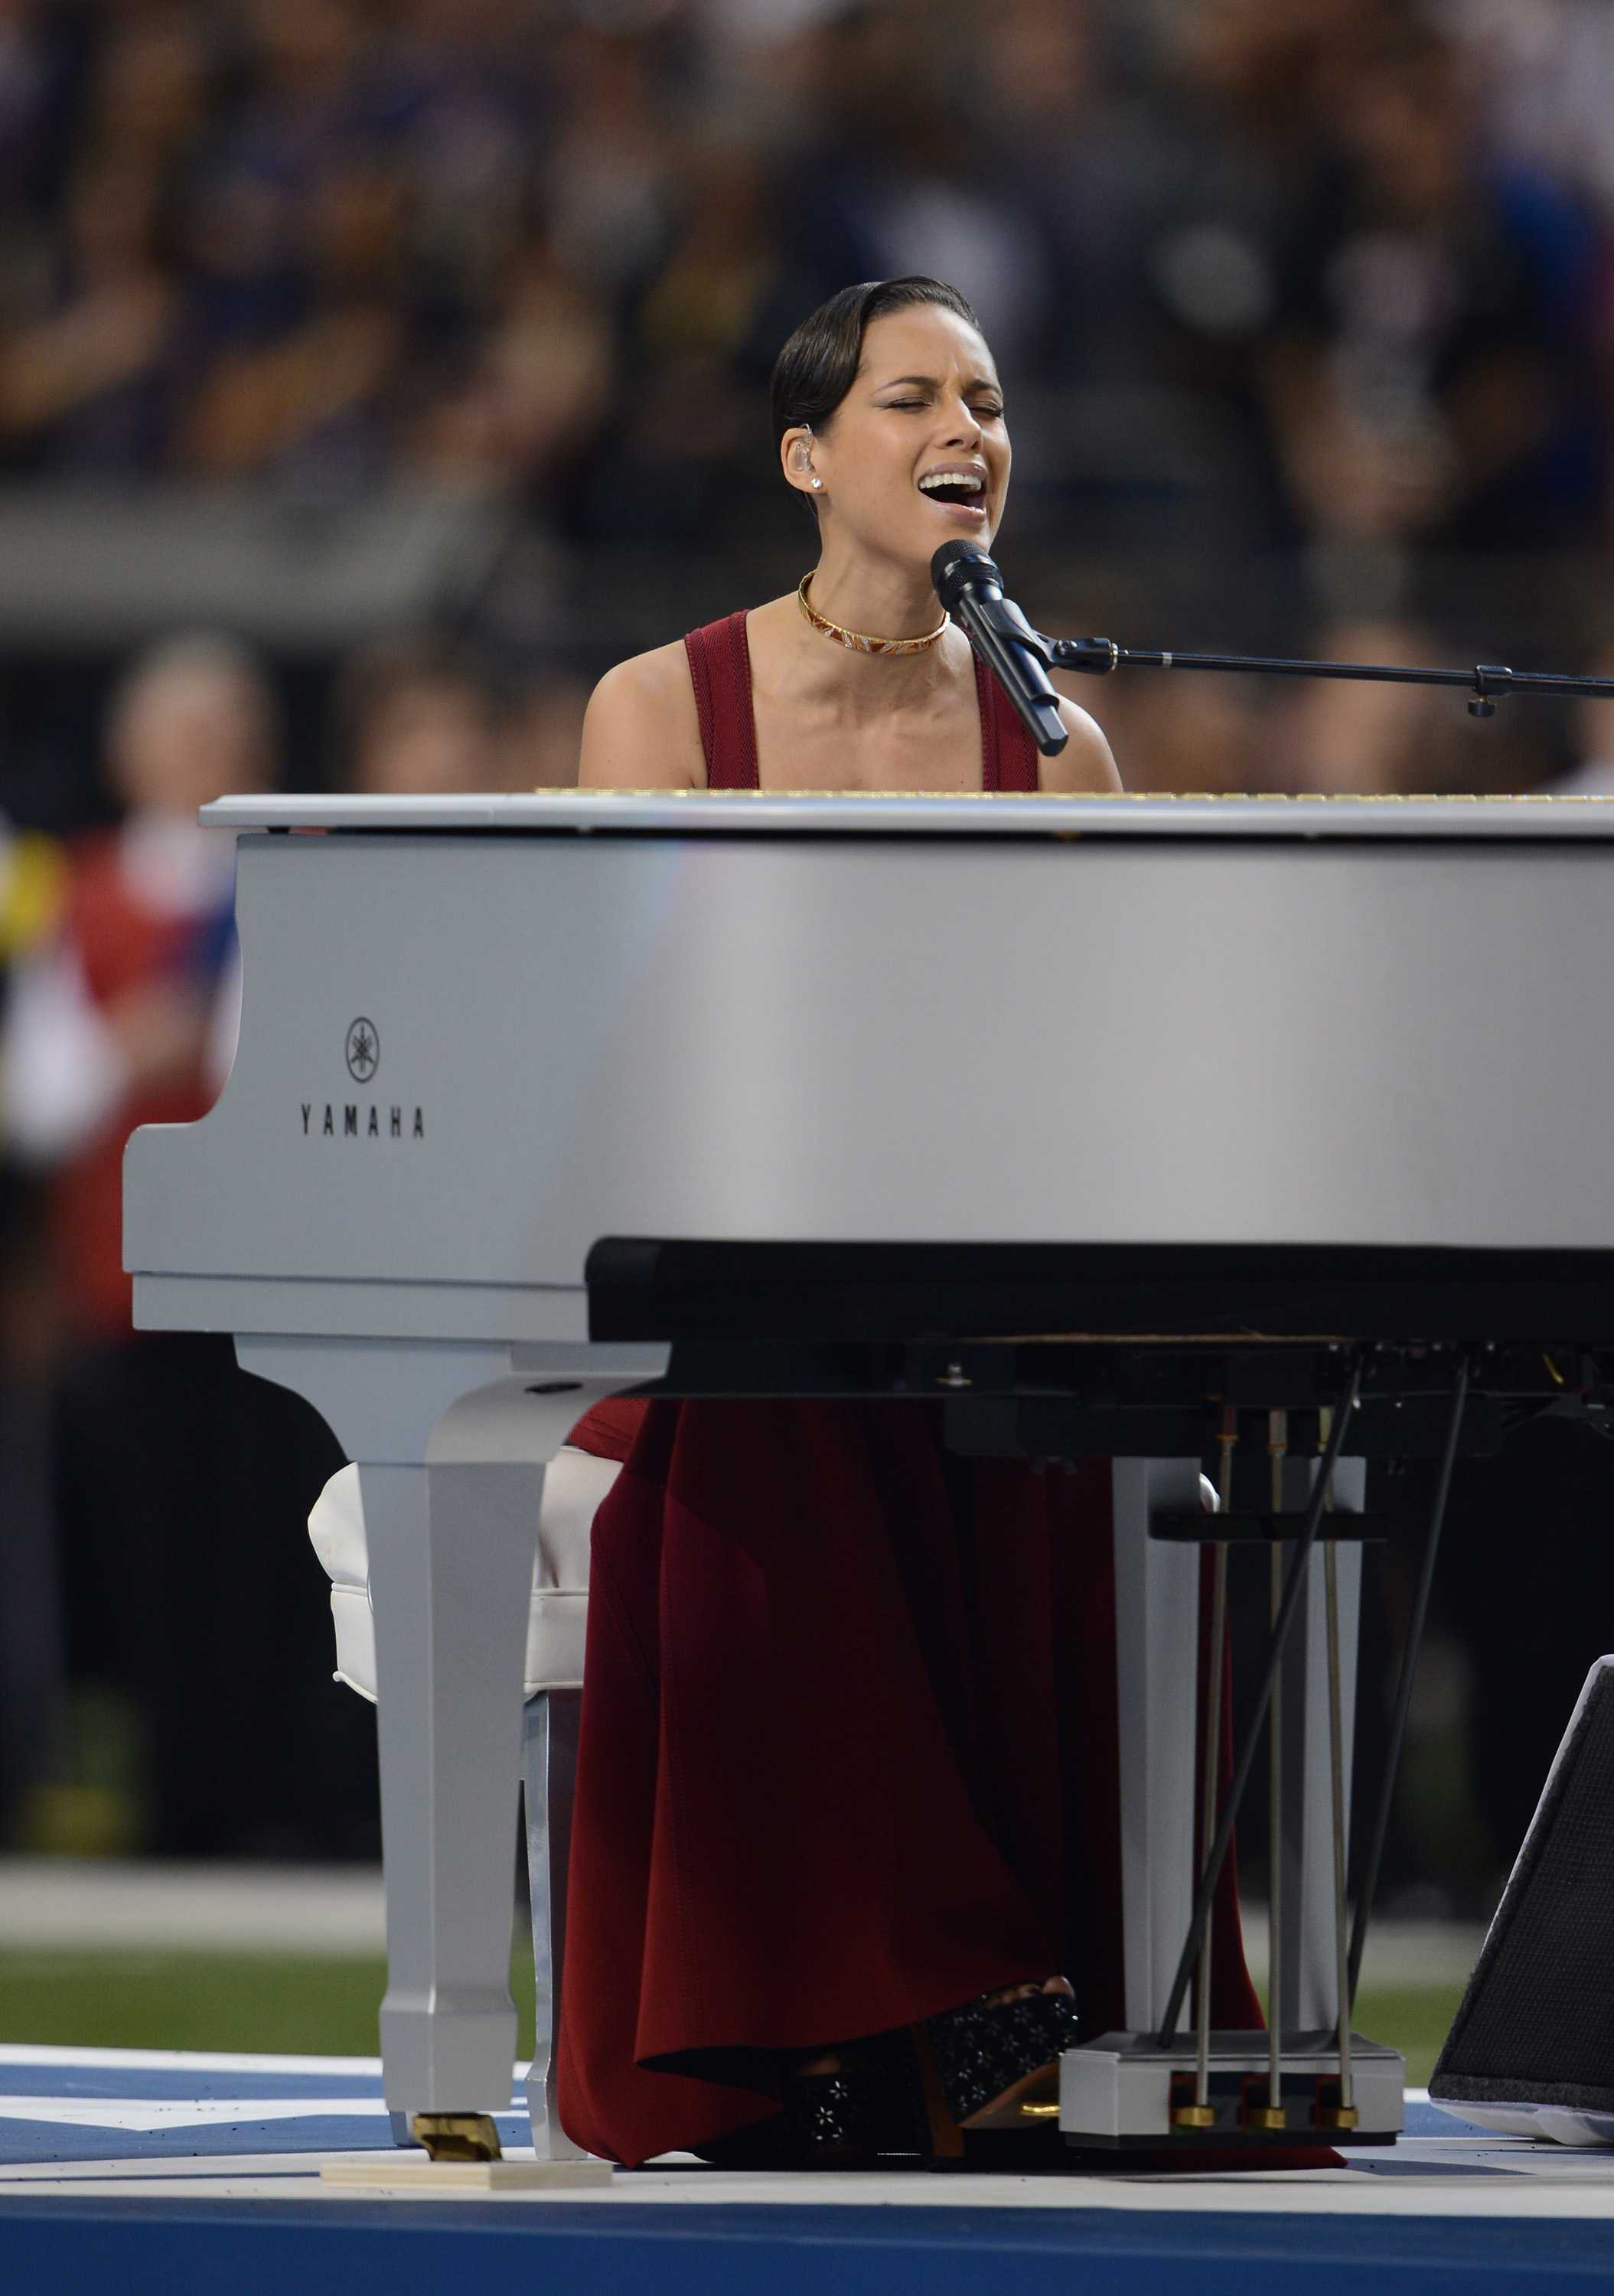 Alicia+Keys+plays+the+piano+and+sings